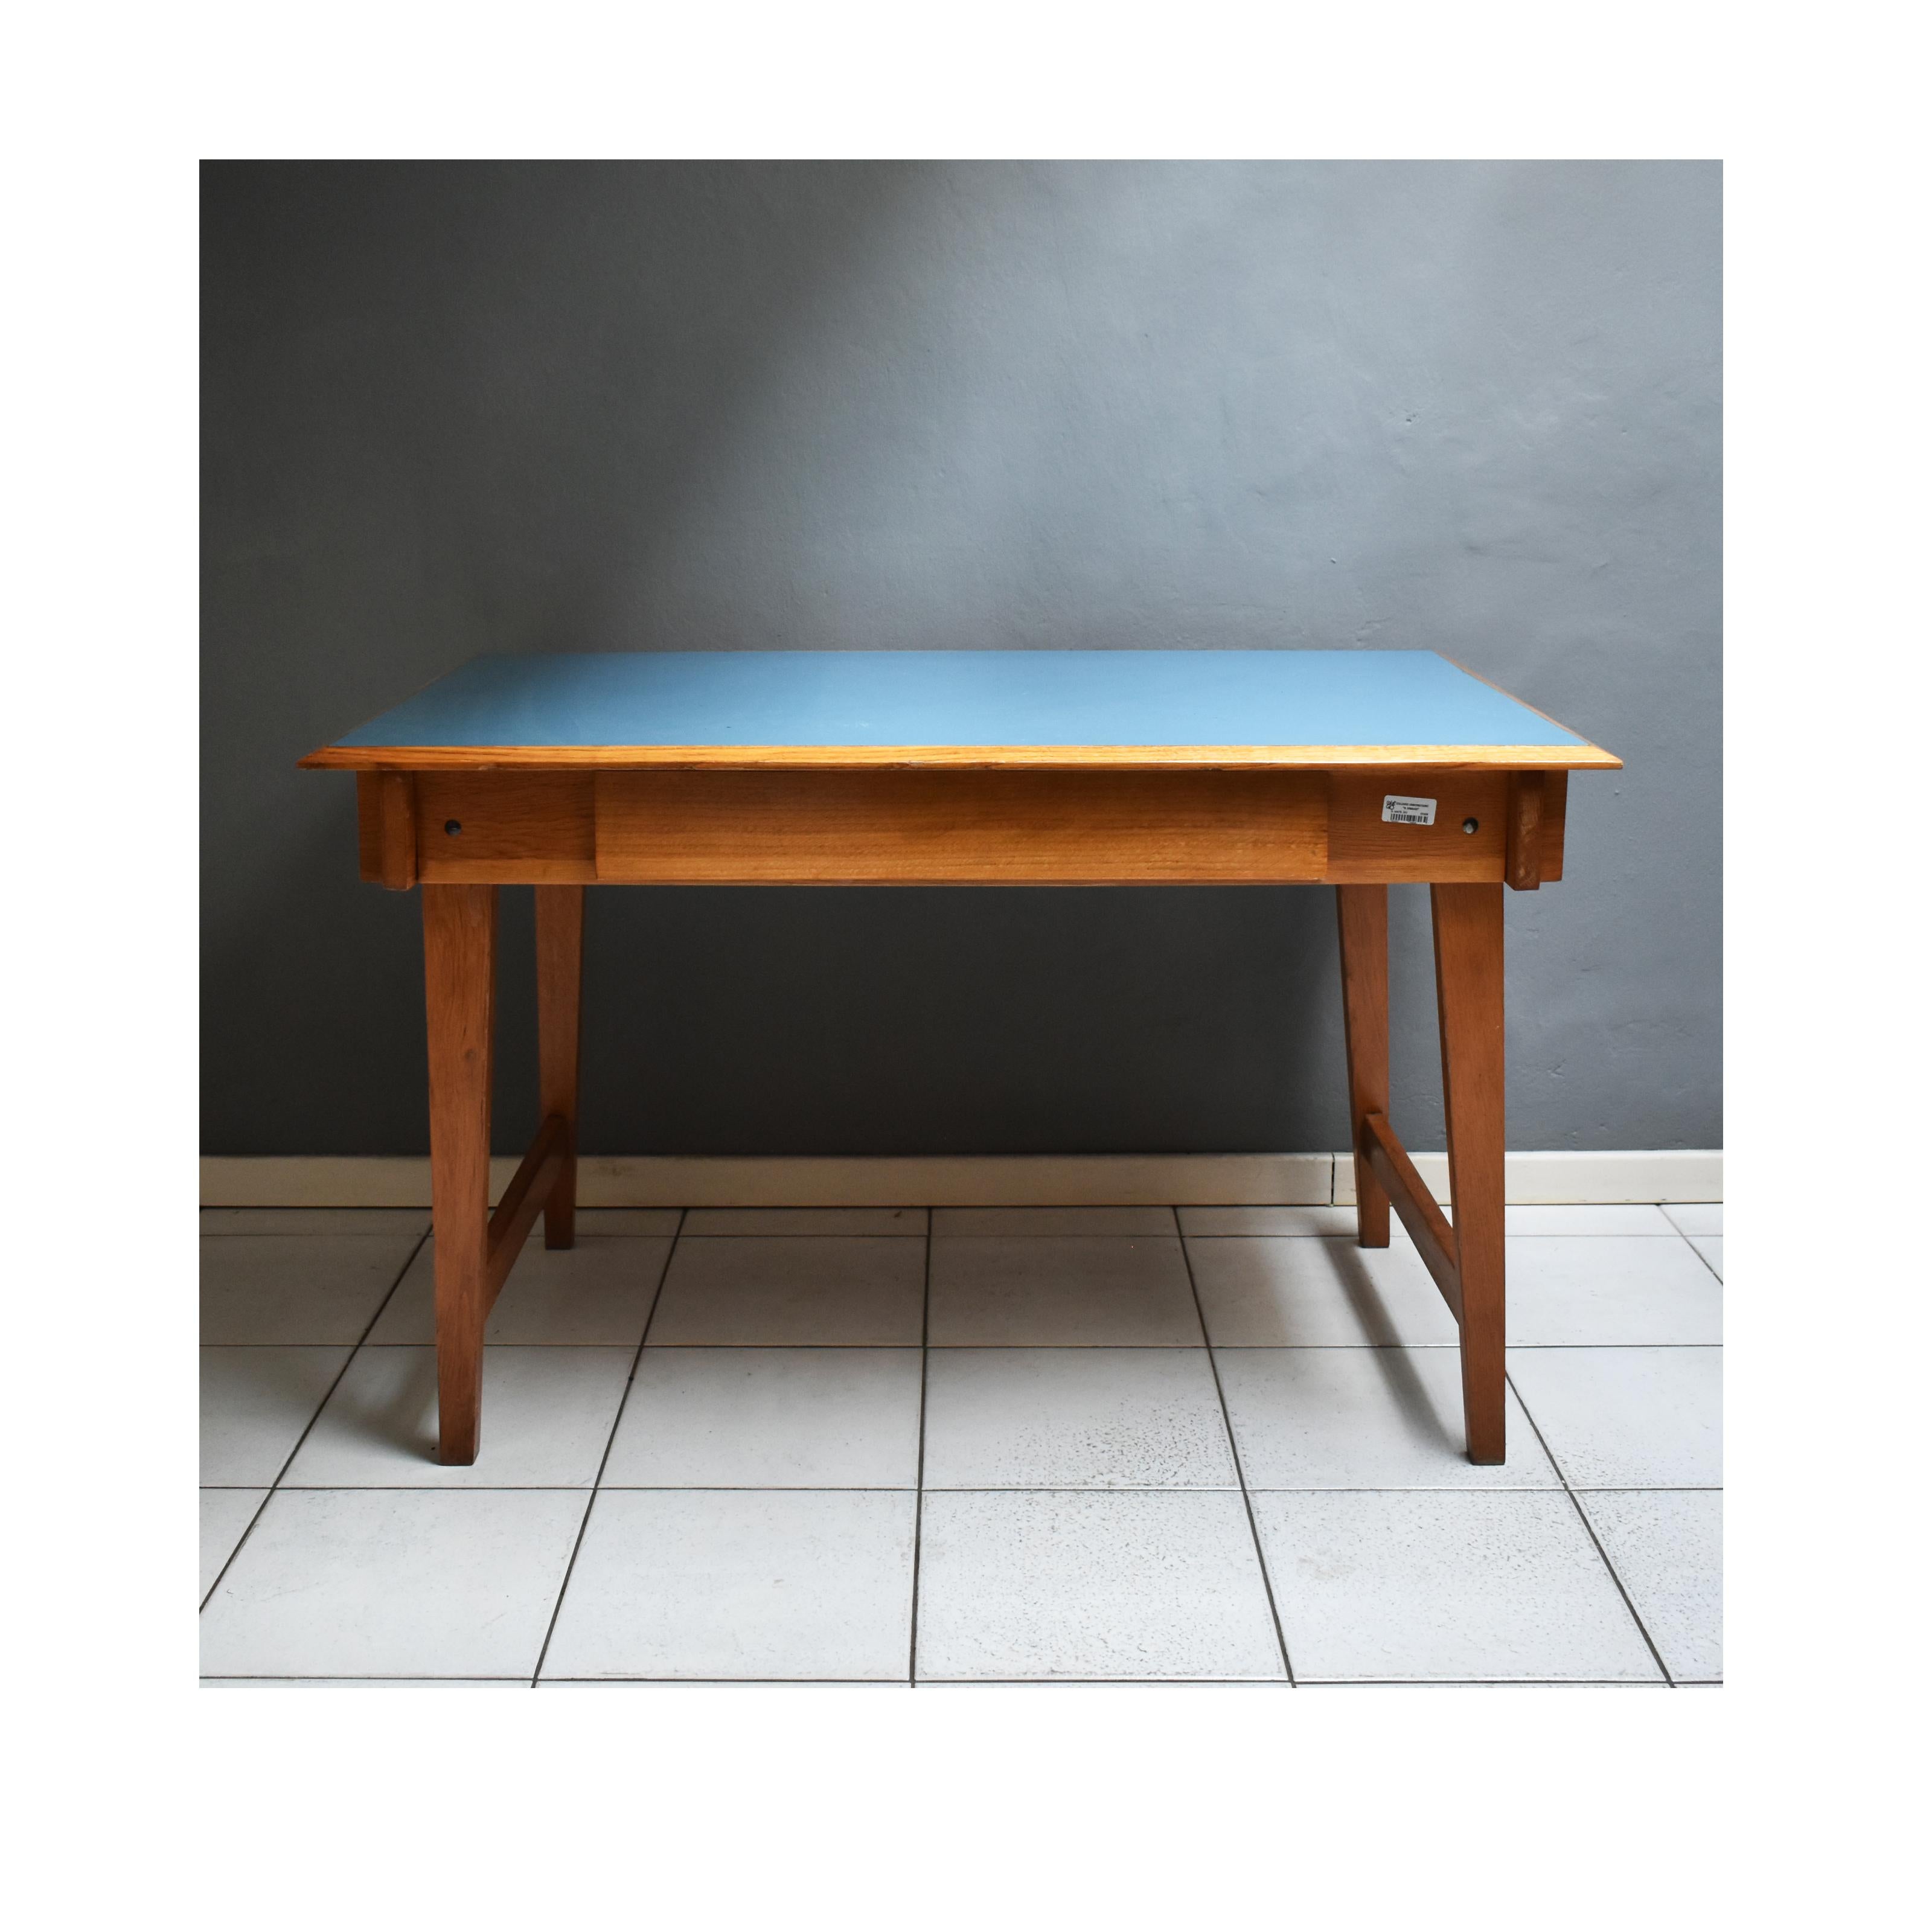 1960s desk, Italian manufacture in wood and light blue formica top.
It is a mid-century table/writing desk.
The desk has a rectangular structure with a central drawer in wood.
The table has a label that showing the provenance: University of R.